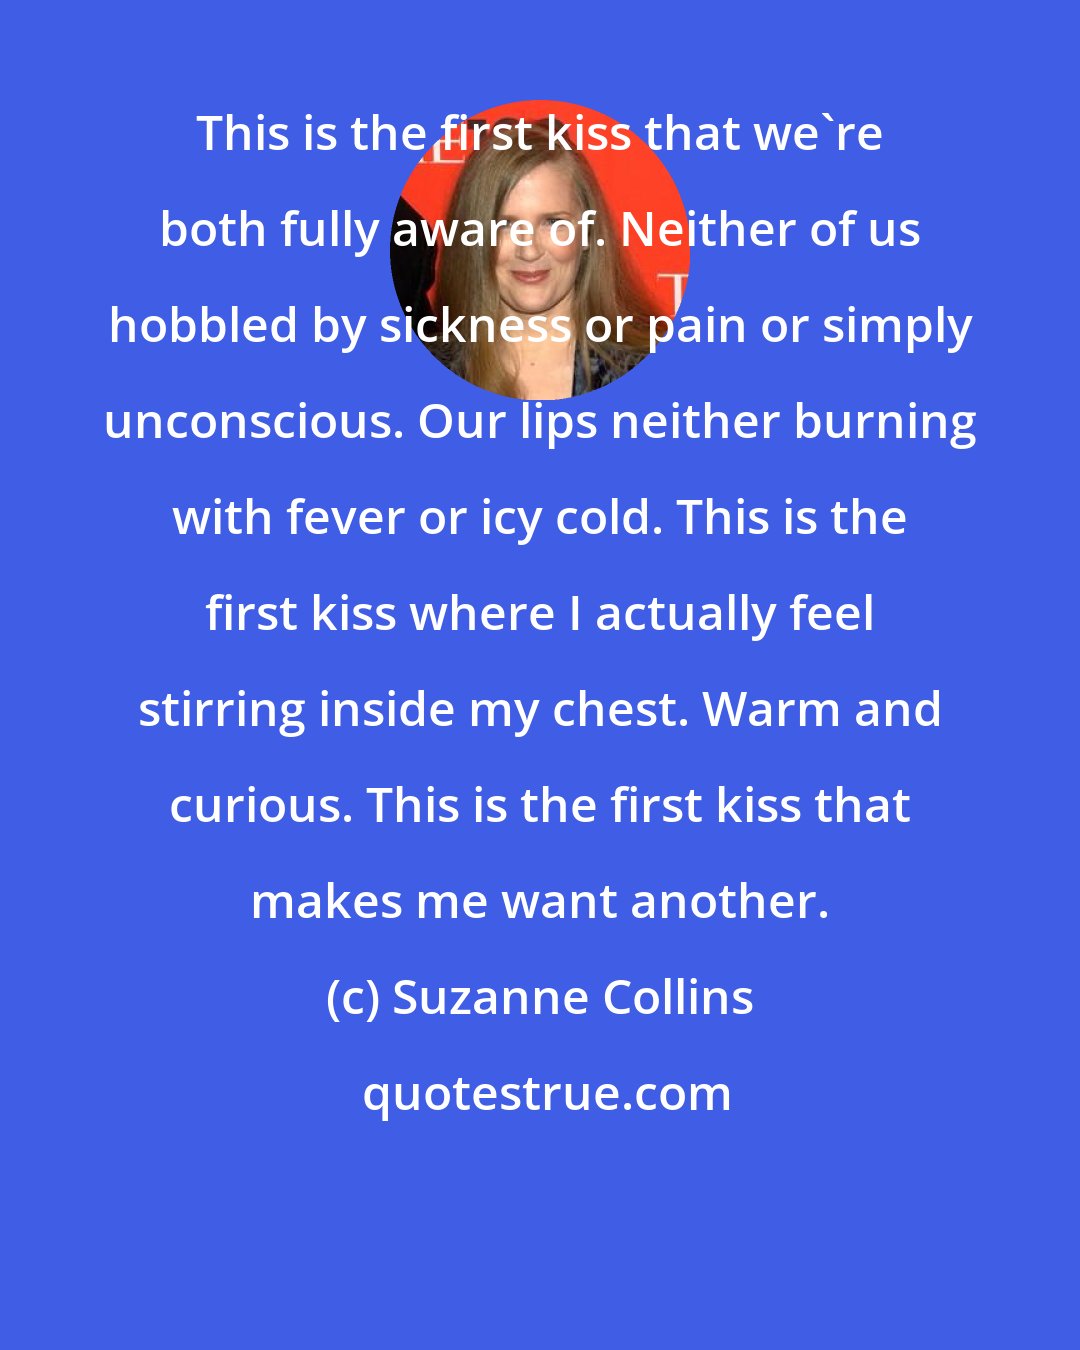 Suzanne Collins: This is the first kiss that we're both fully aware of. Neither of us hobbled by sickness or pain or simply unconscious. Our lips neither burning with fever or icy cold. This is the first kiss where I actually feel stirring inside my chest. Warm and curious. This is the first kiss that makes me want another.